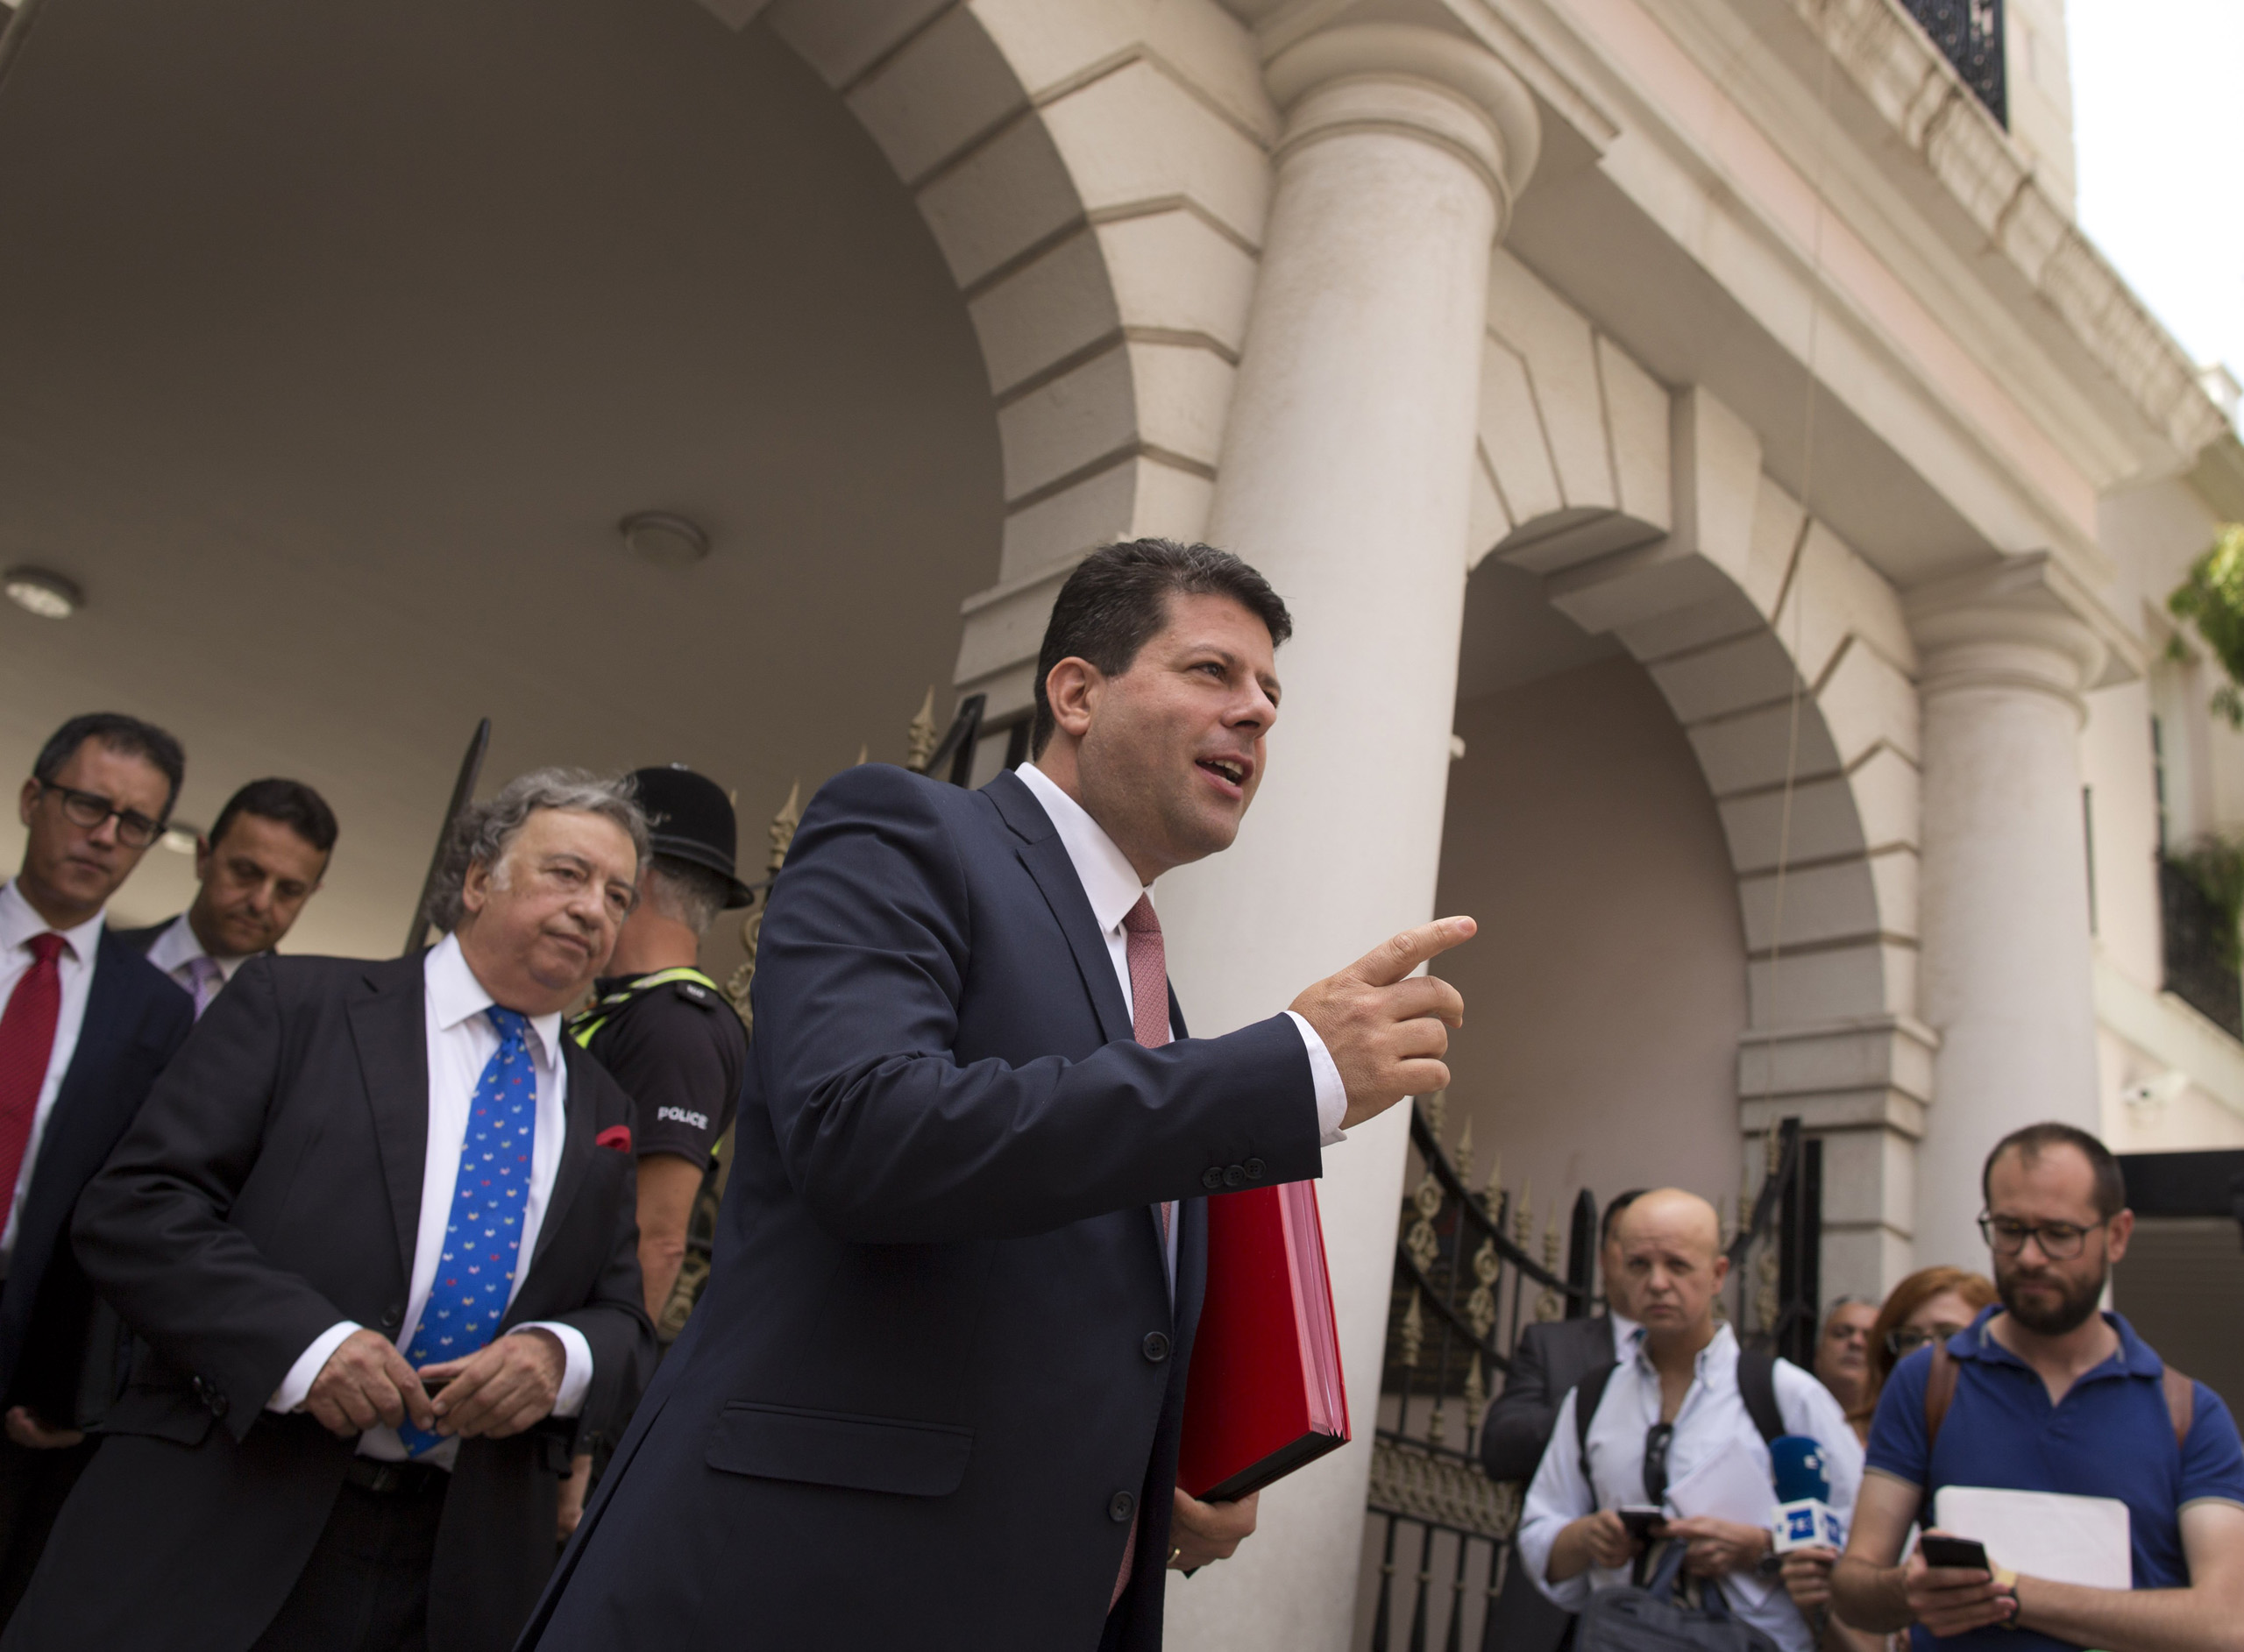 Chief Minister of Gibraltar Fabian Picardo (C) gestures as he leaves after a meeting with members of the Government in Gibraltar on June 24, 2016. (Sergio Camacho—AFP/Getty Images)